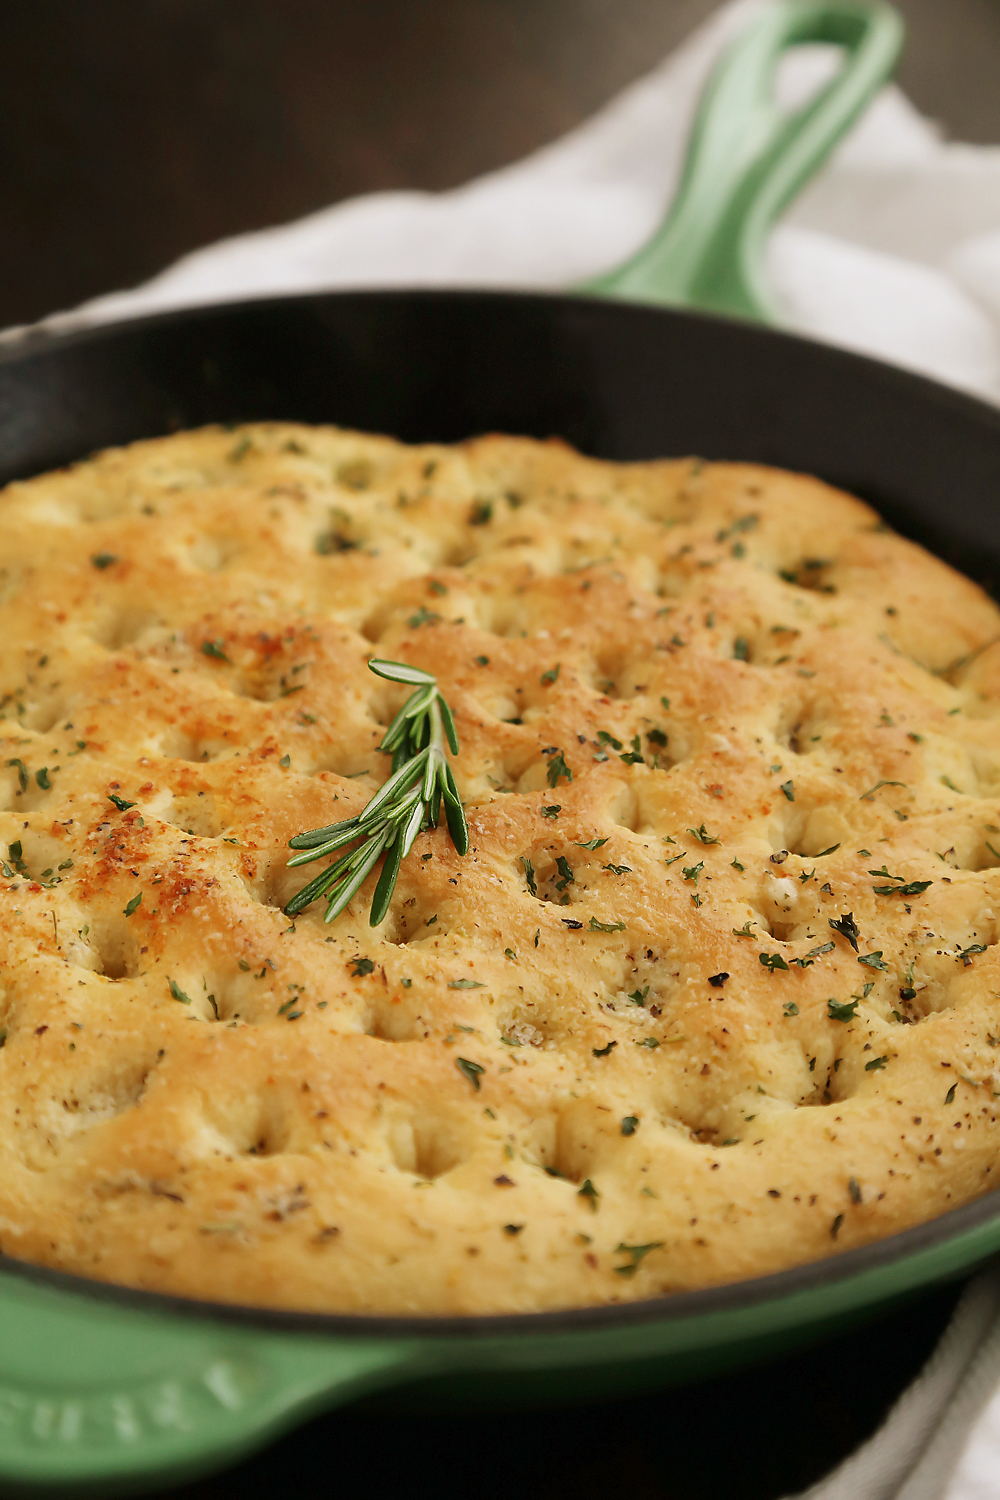 One-Hour Skillet Garlic Parmesan Focaccia - So soft and fluffy! This bread is the perfect side for hearty vegetable dishes, soups, stews and saucy roasts. Thecomfortofcooking.com